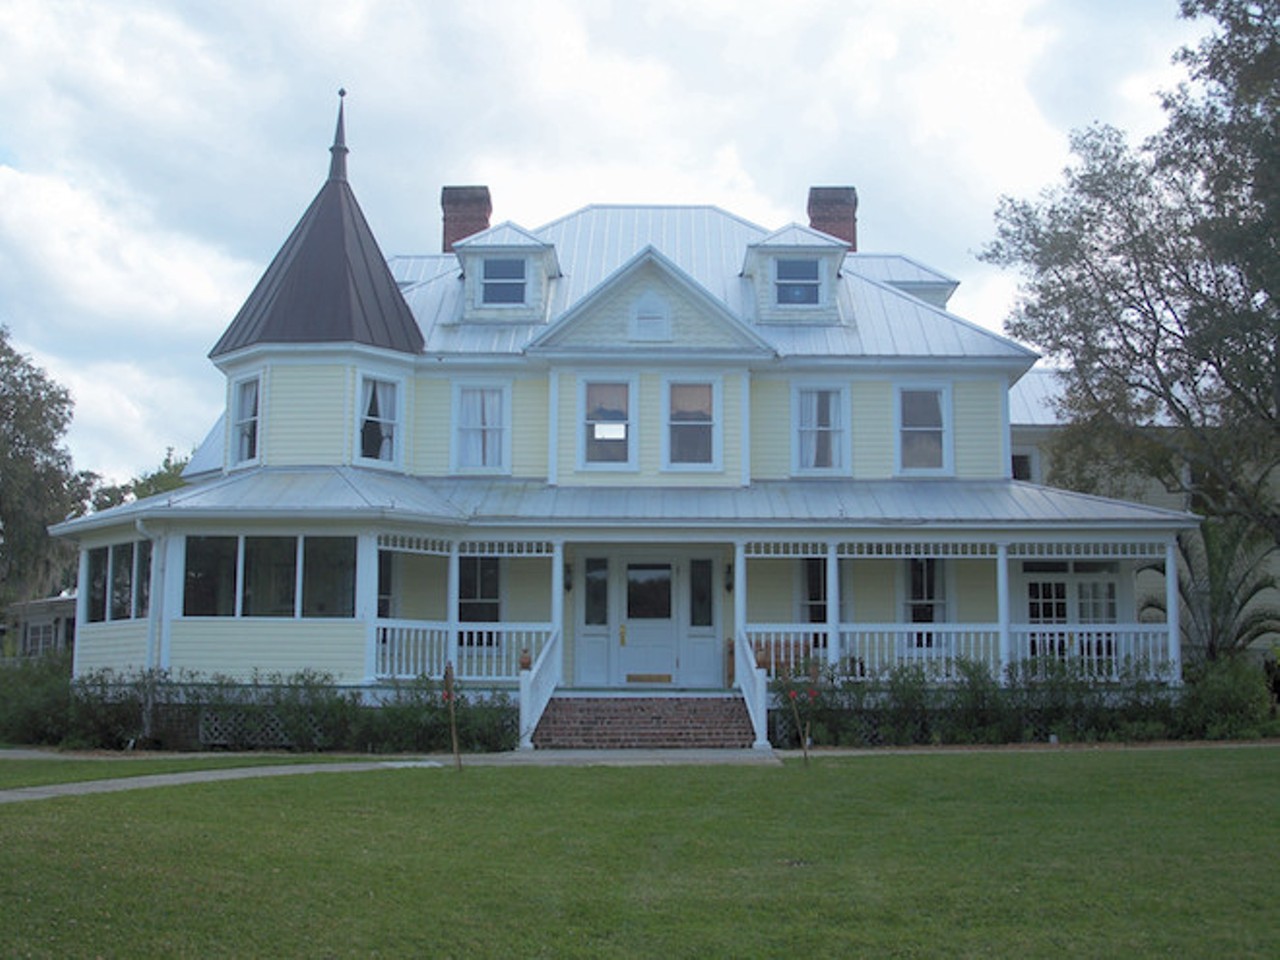 Highland Manor, Apopka
Located in Apopka, this house passed through several owners including the McBride family and the Townsend family before becoming a wedding event location. Strange noises are said to happen in the attic and ghost&#150;like presences get a little bit too friendly with guests.Image via Wikimedia